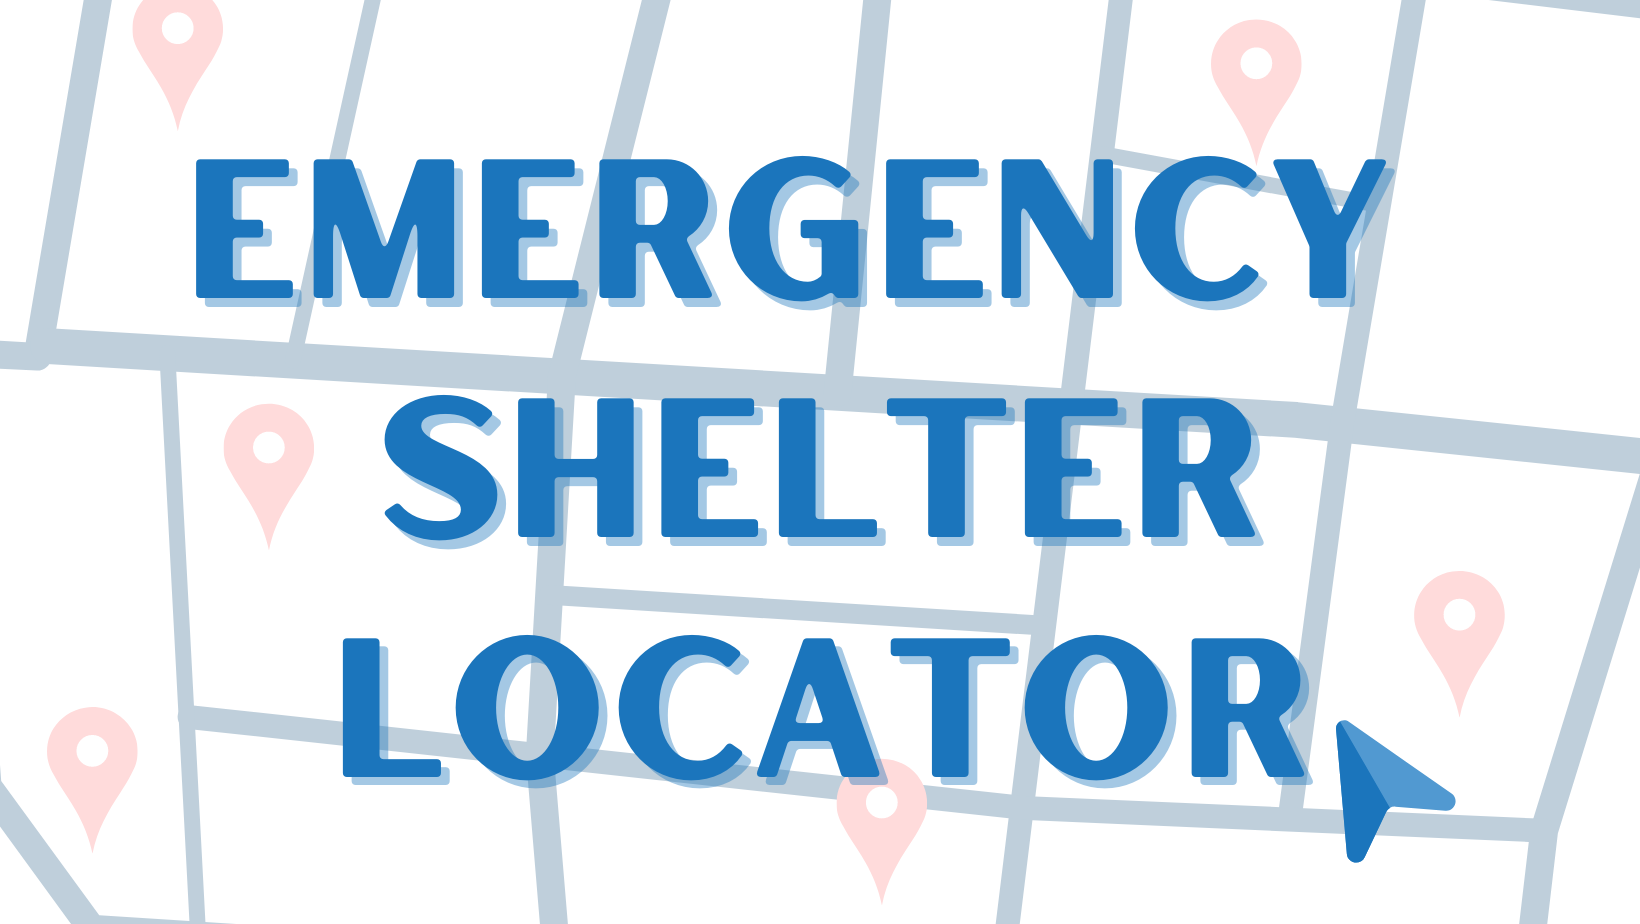 Emergency Shelter Locator Graphic linked to Brunswick County Emergency Shelter Locator Map